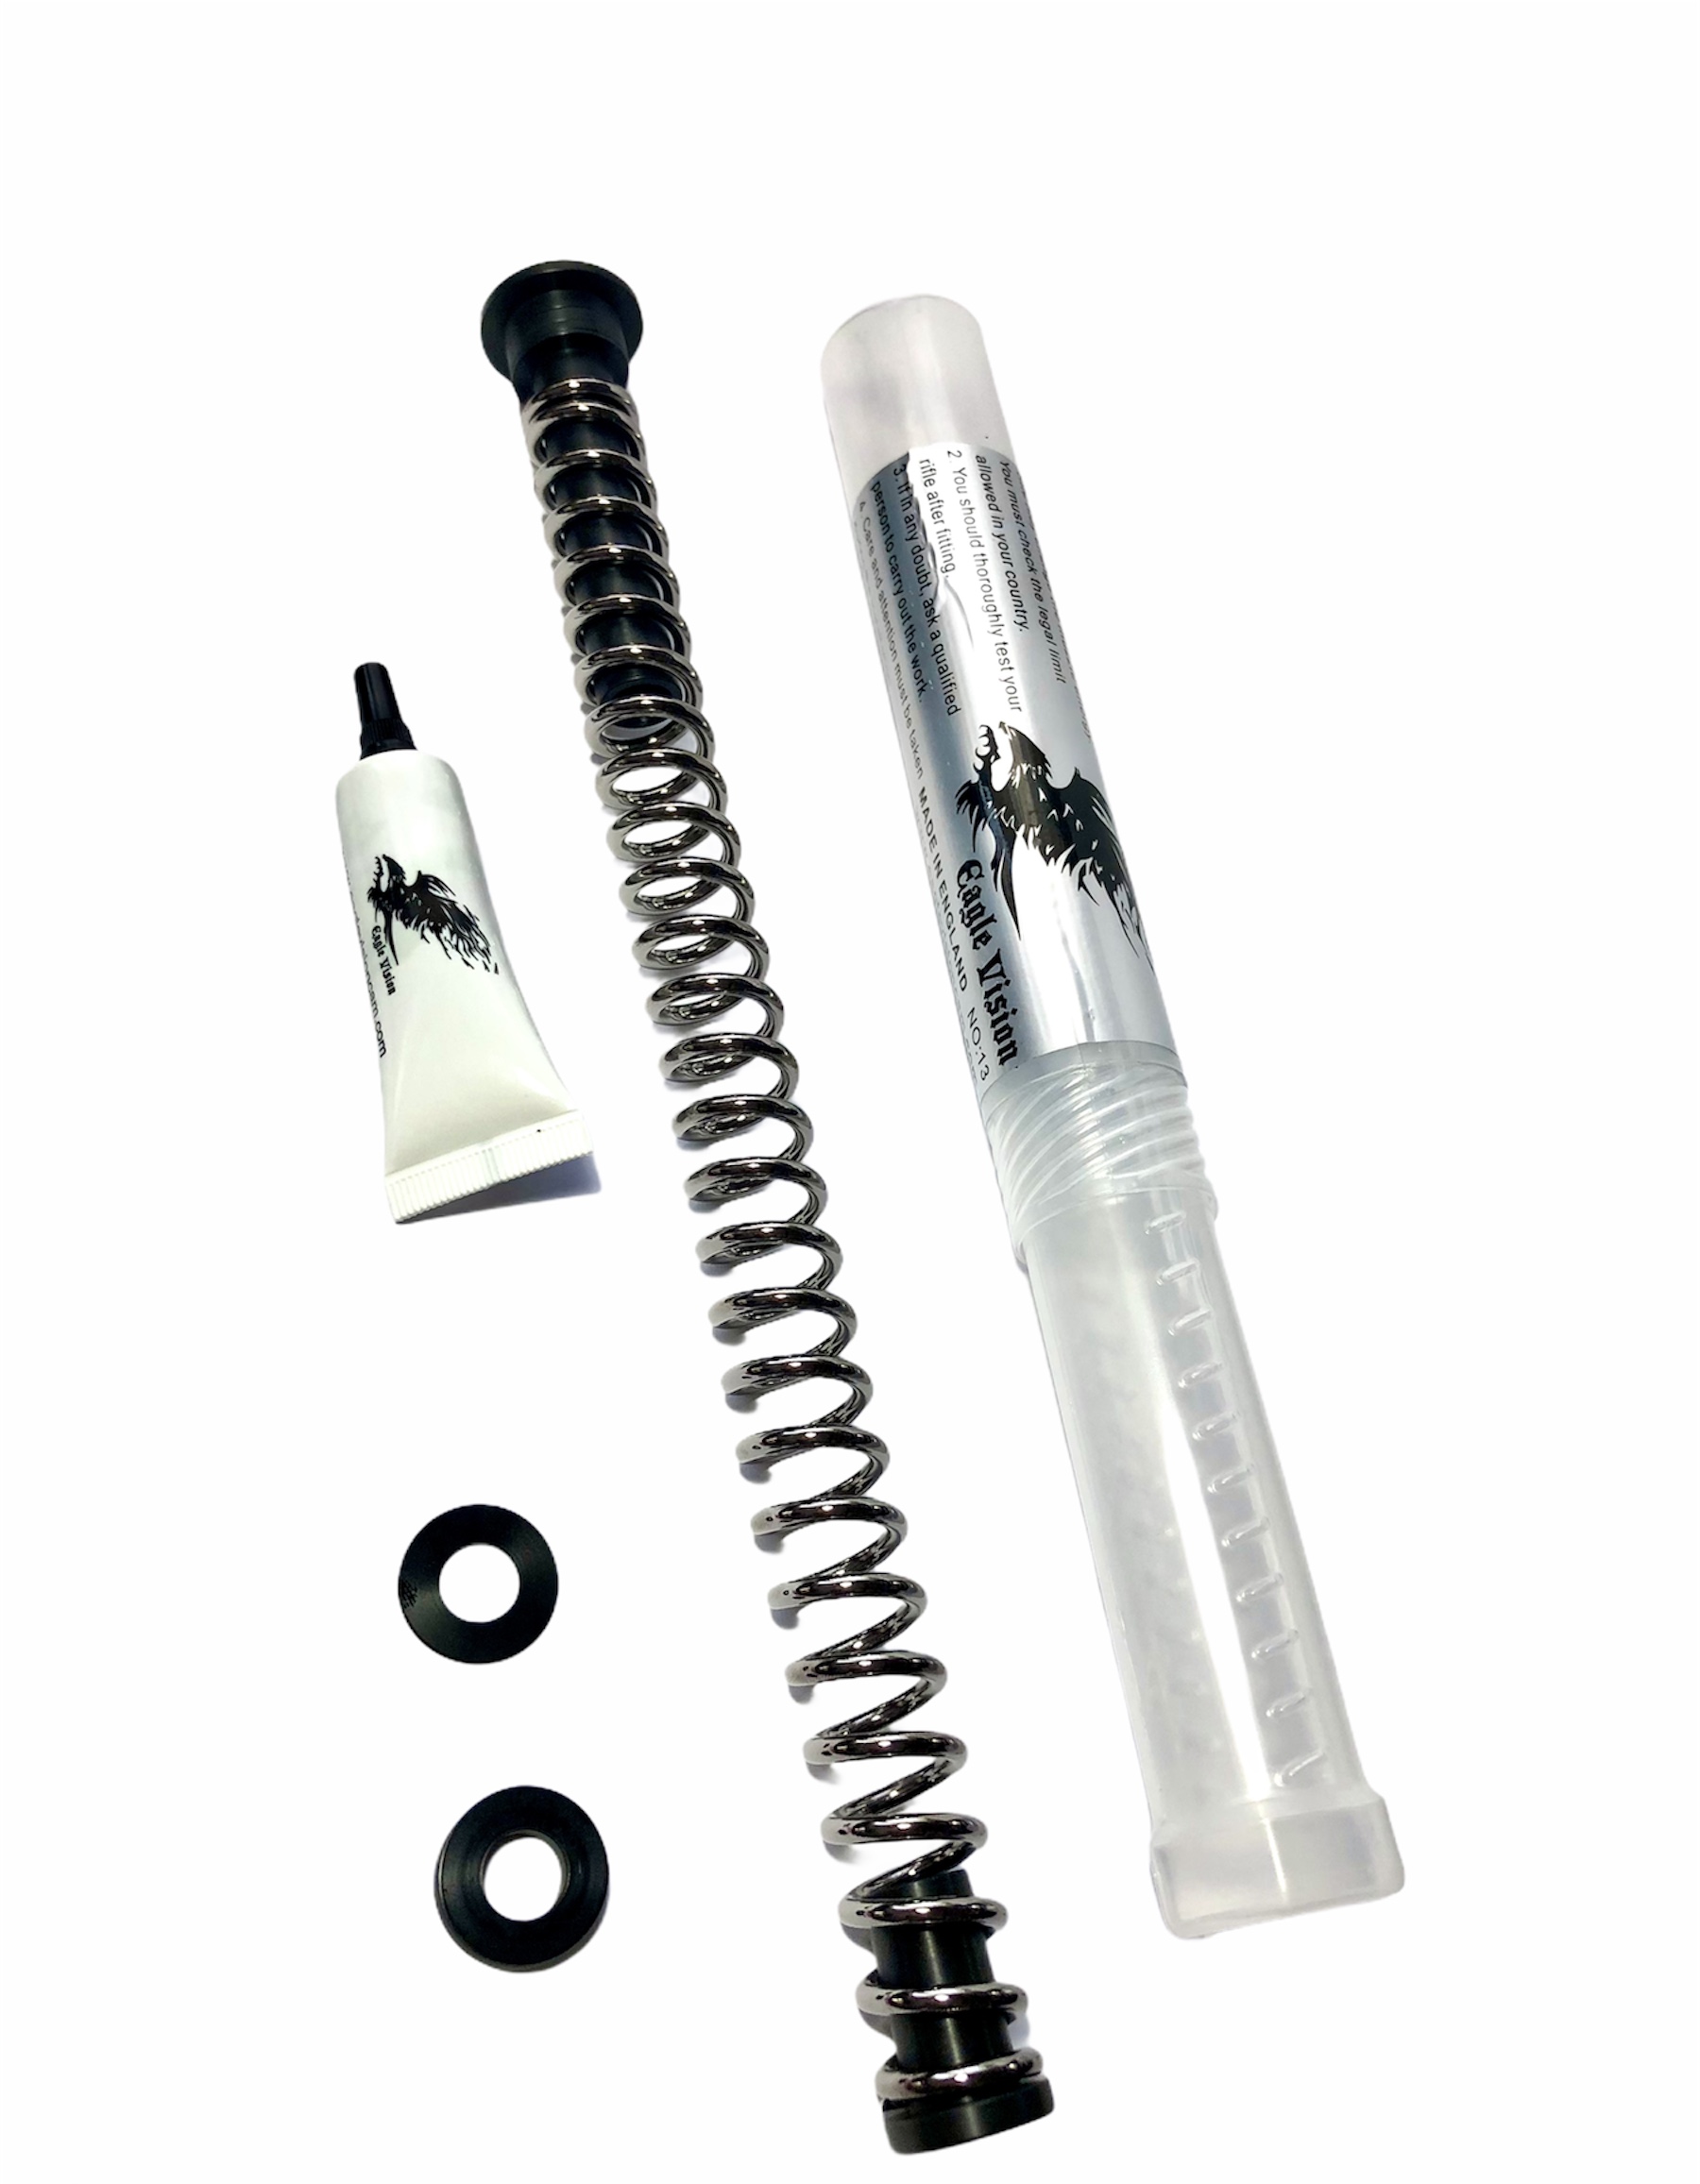 Eaglevisioncam Tuning Kit Spring guide Fit To Weihrauch HW45 11.70mm Kit 